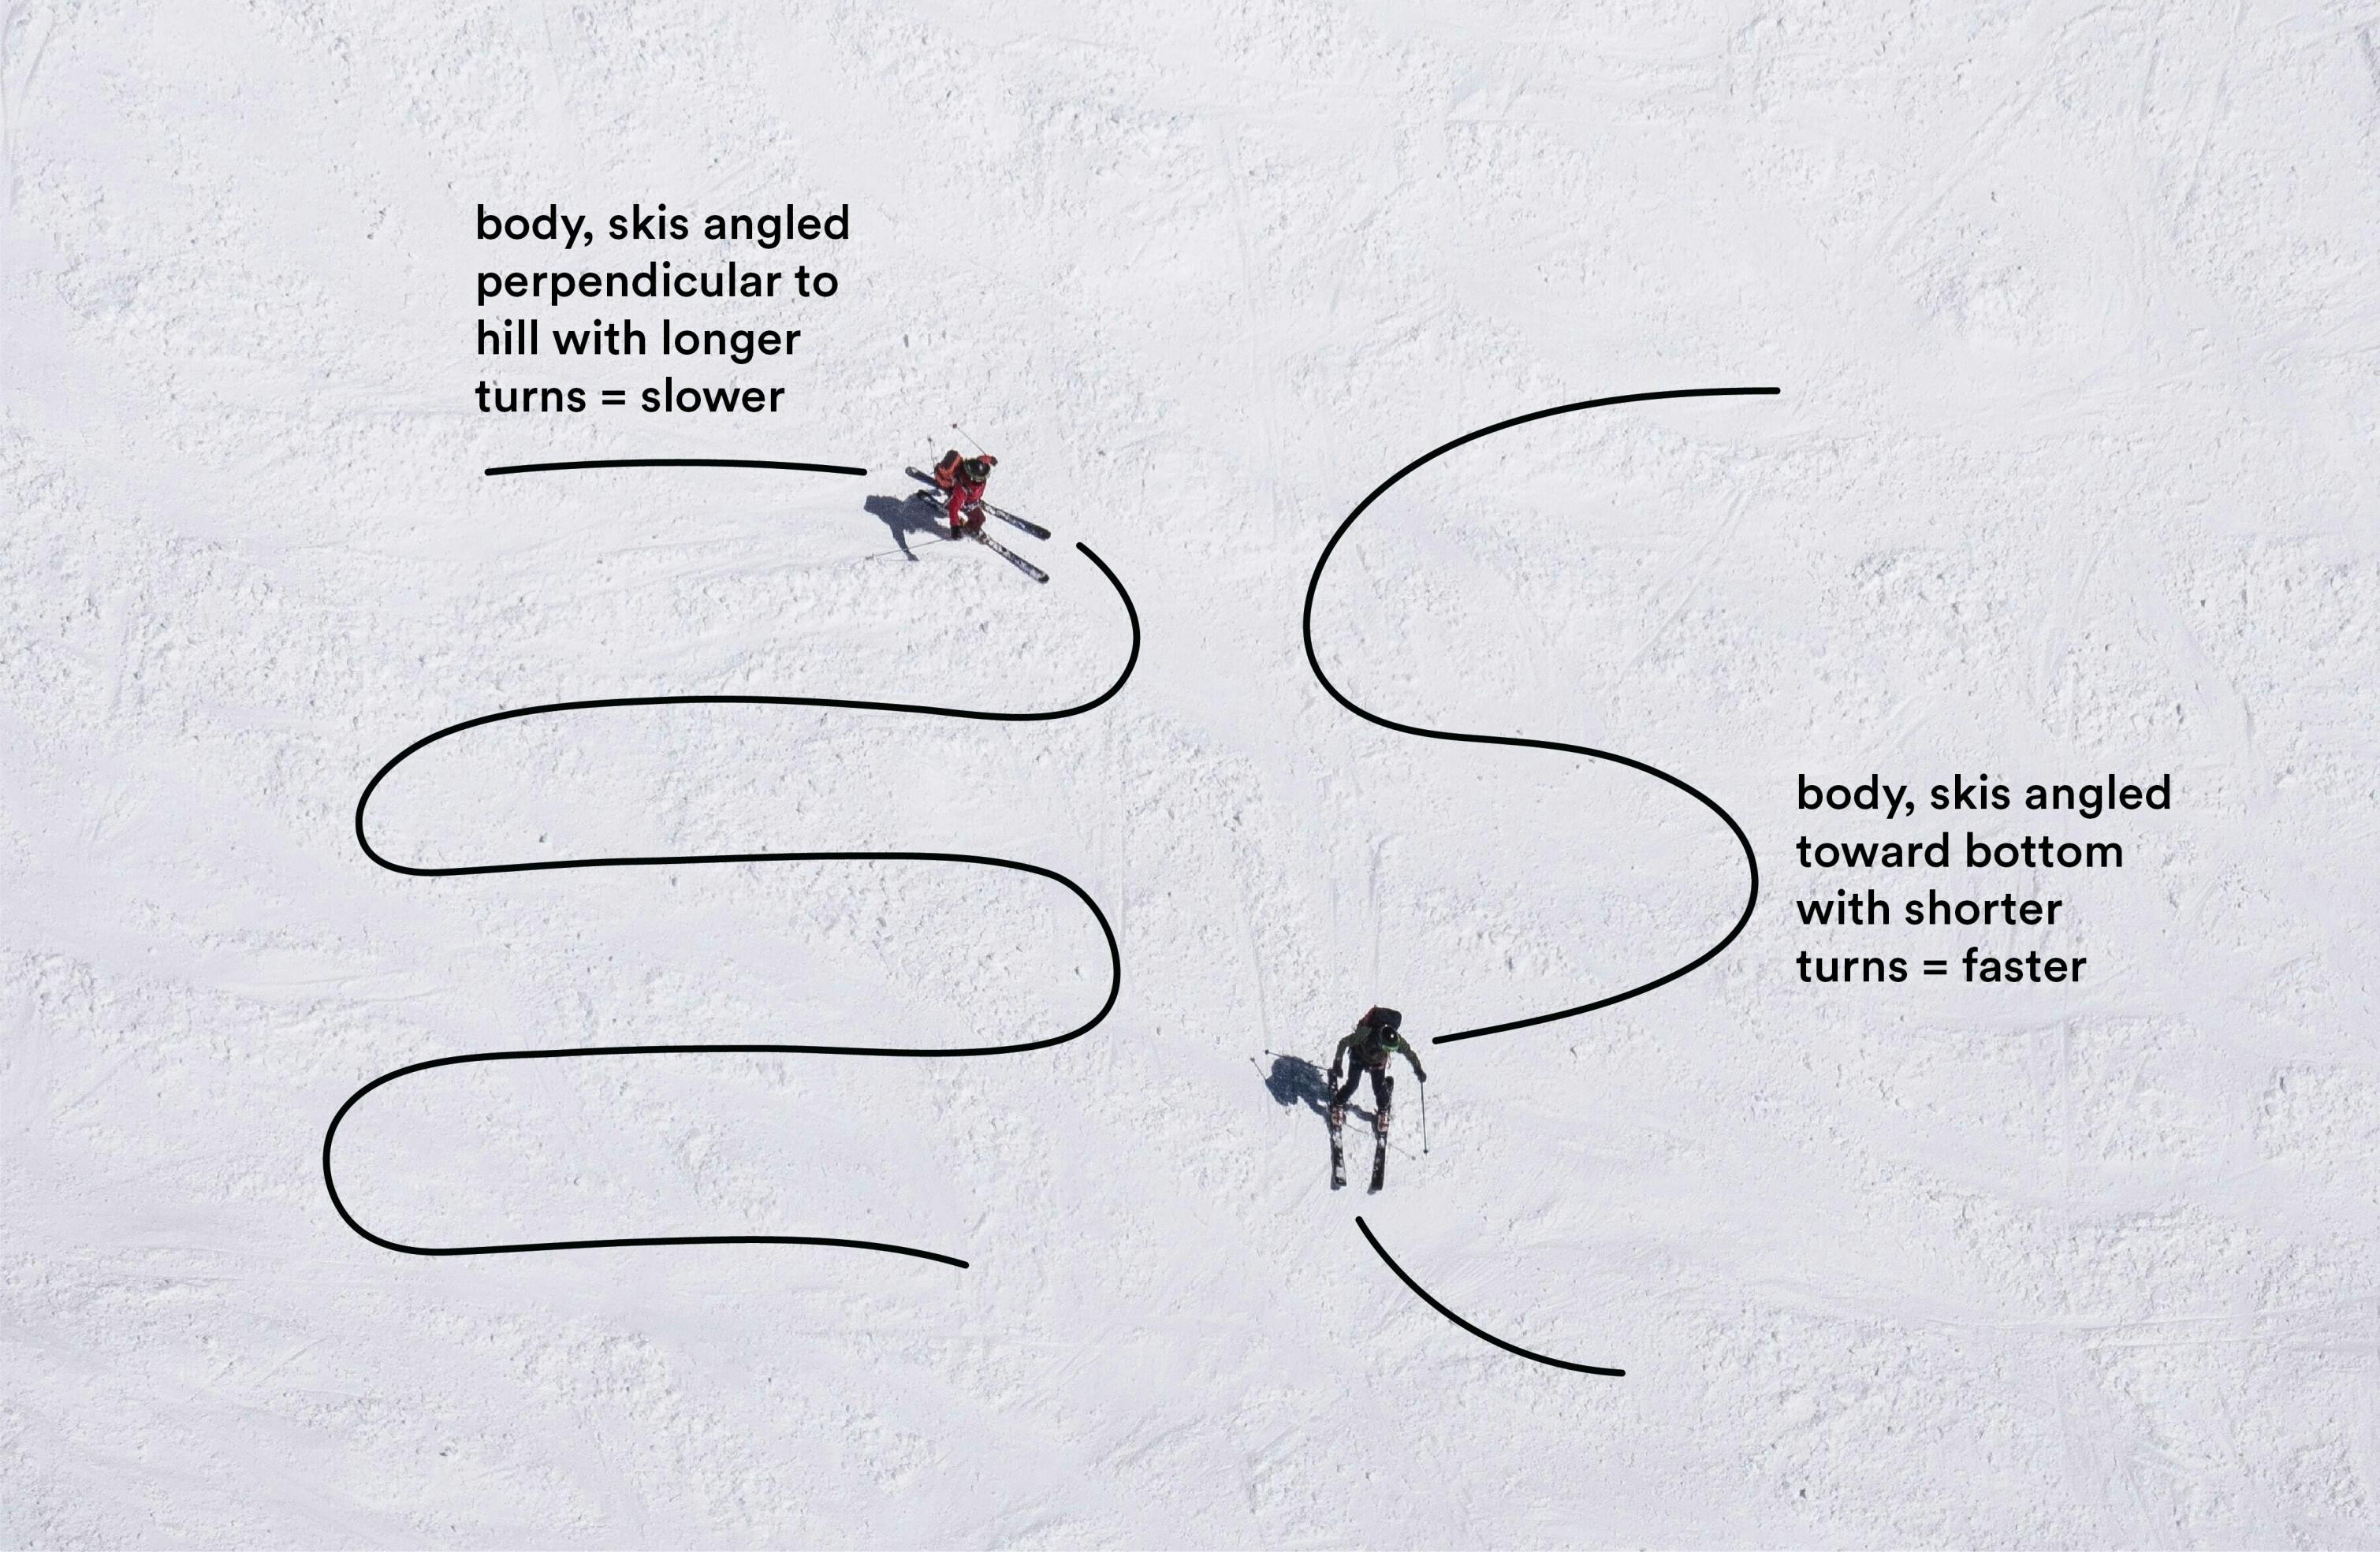 This graphic shows two skiers going downhill. One makes tighter turns with the text "body, skis angled perpendicular to hill with longer turns = slower" and the other makes looser turns with the text "body, skis angled towards bottoms with shorter turns = faster."